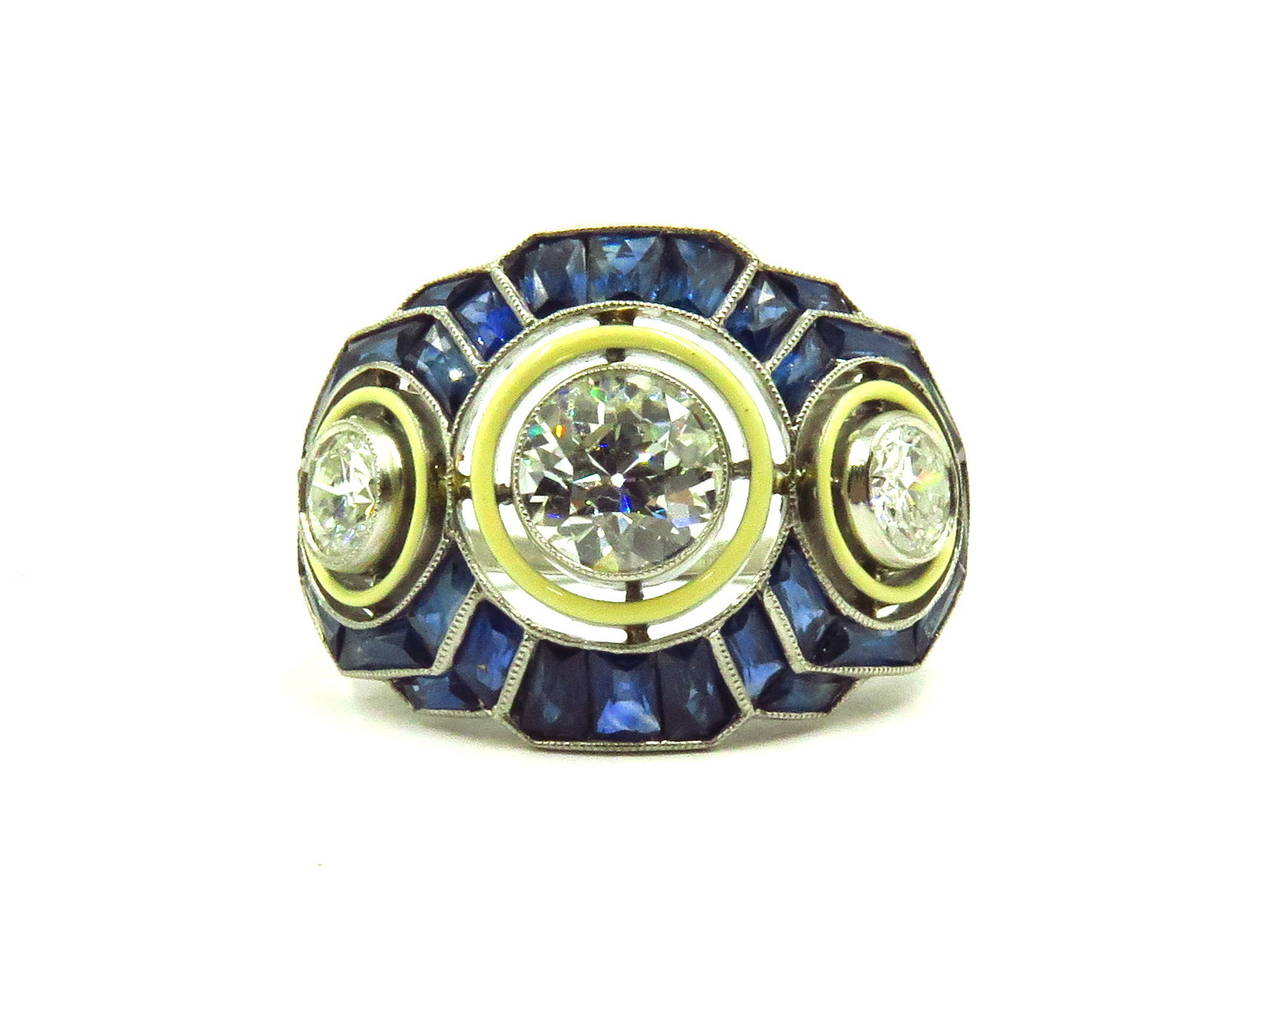 This elegant deco style 3 stone diamond ring is surrounded by french calibre cut sapphires. Each of the diamonds is first surrounded by off white color enamel. The center diamond weighs approximately 1ct. The 2 side diamonds total about  .70ct. This